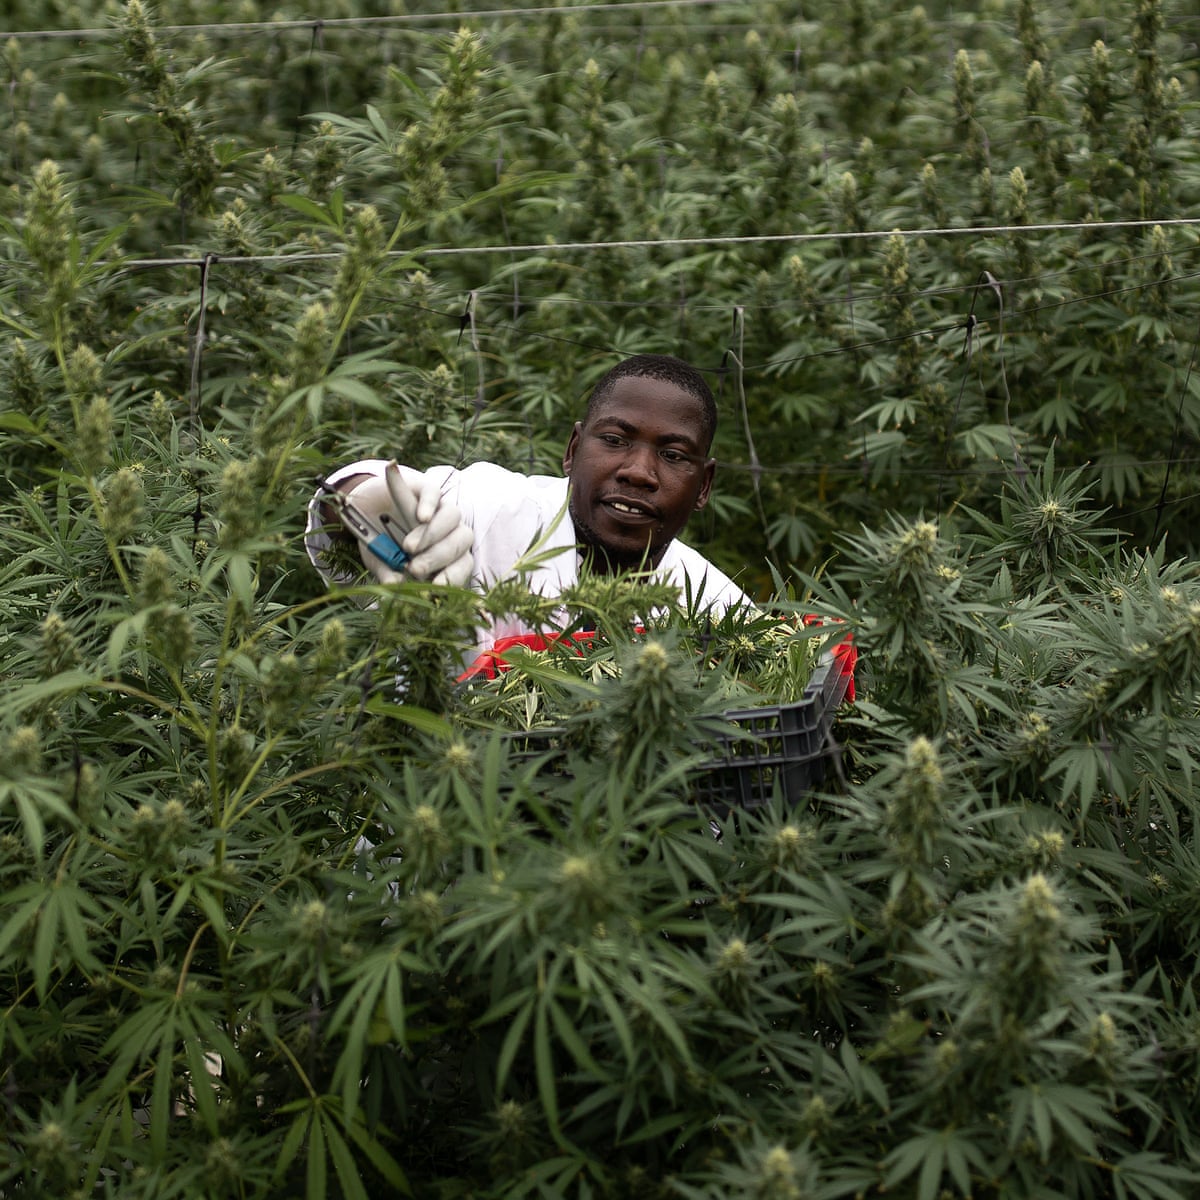 Reefer gladness as UN reclassifies cannabis as less dangerous drug | Drugs  | The Guardian